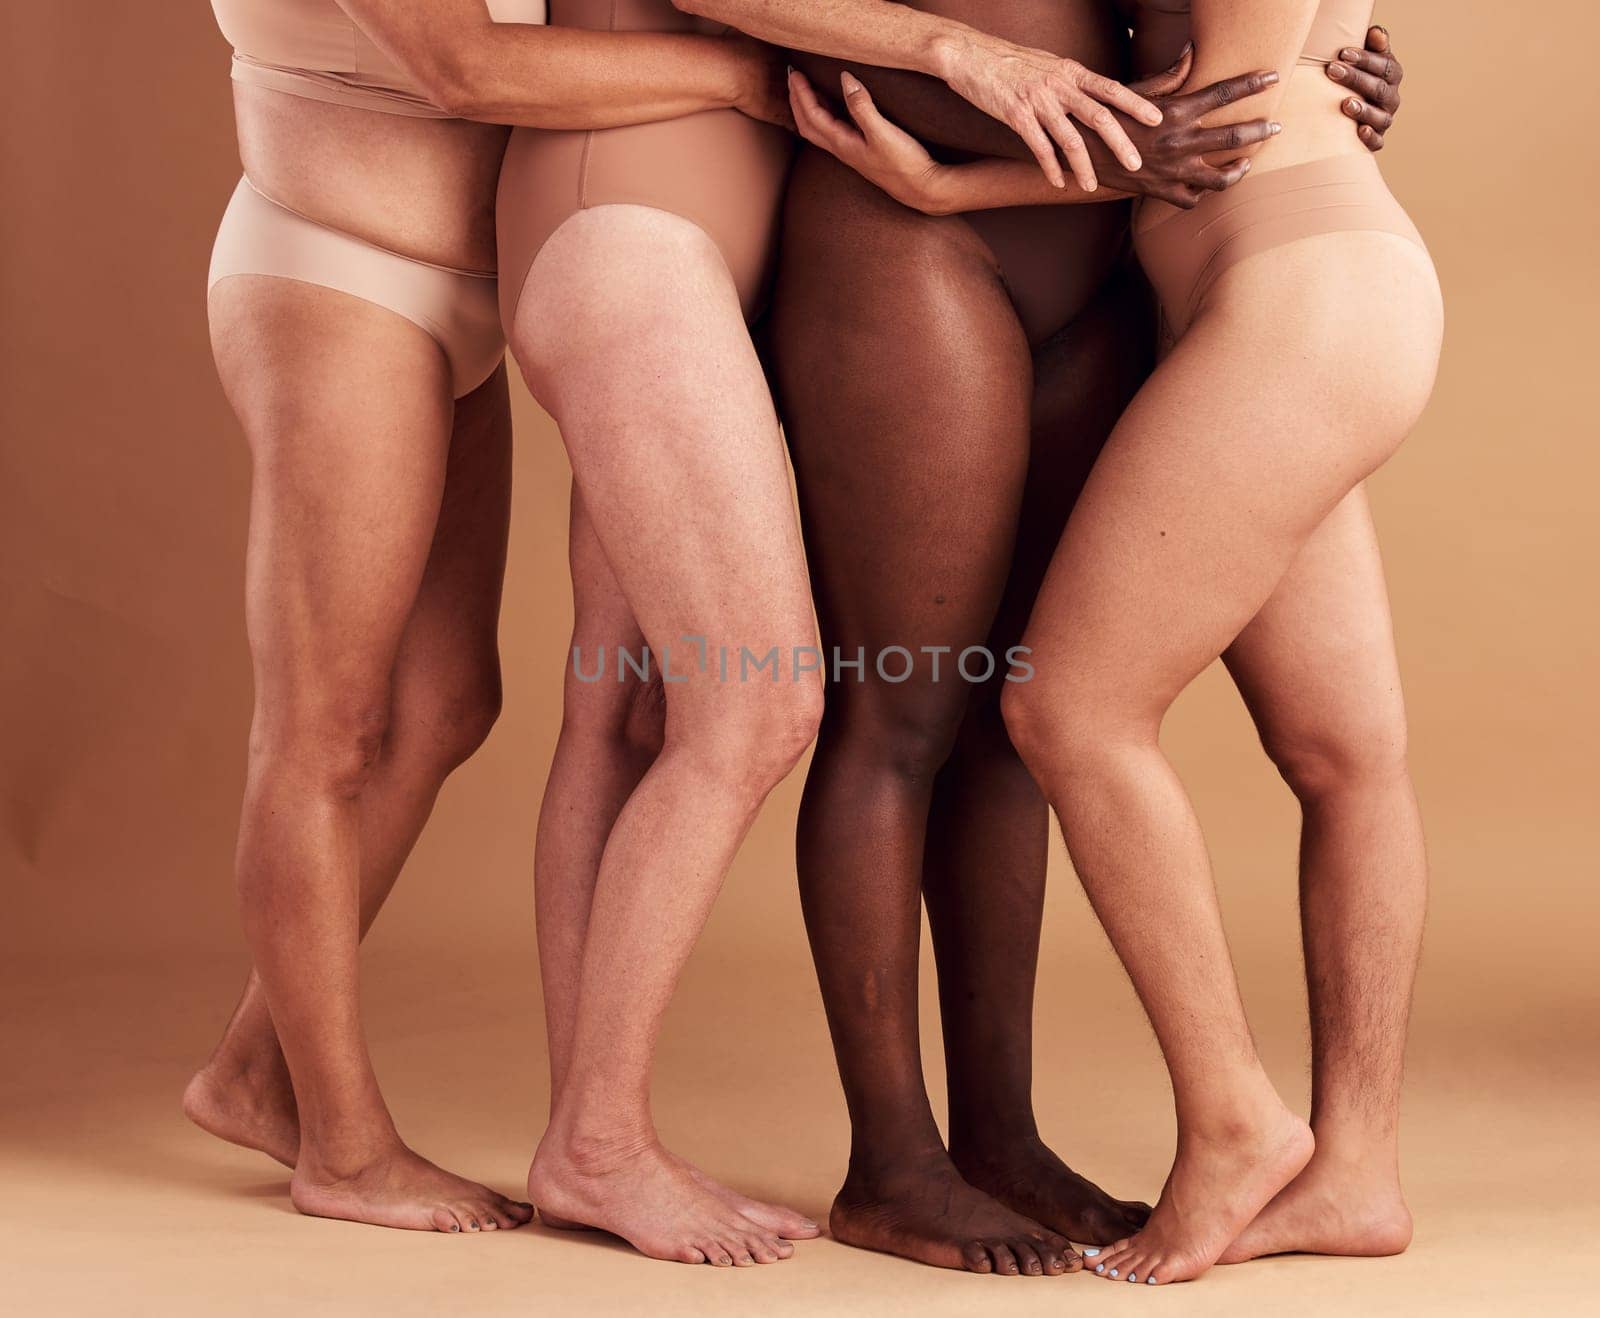 Diversity, legs and body positivity, women in underwear huddle together on studio background. Feet, friends and health, empowerment in self love and care in global community of diverse female bodies